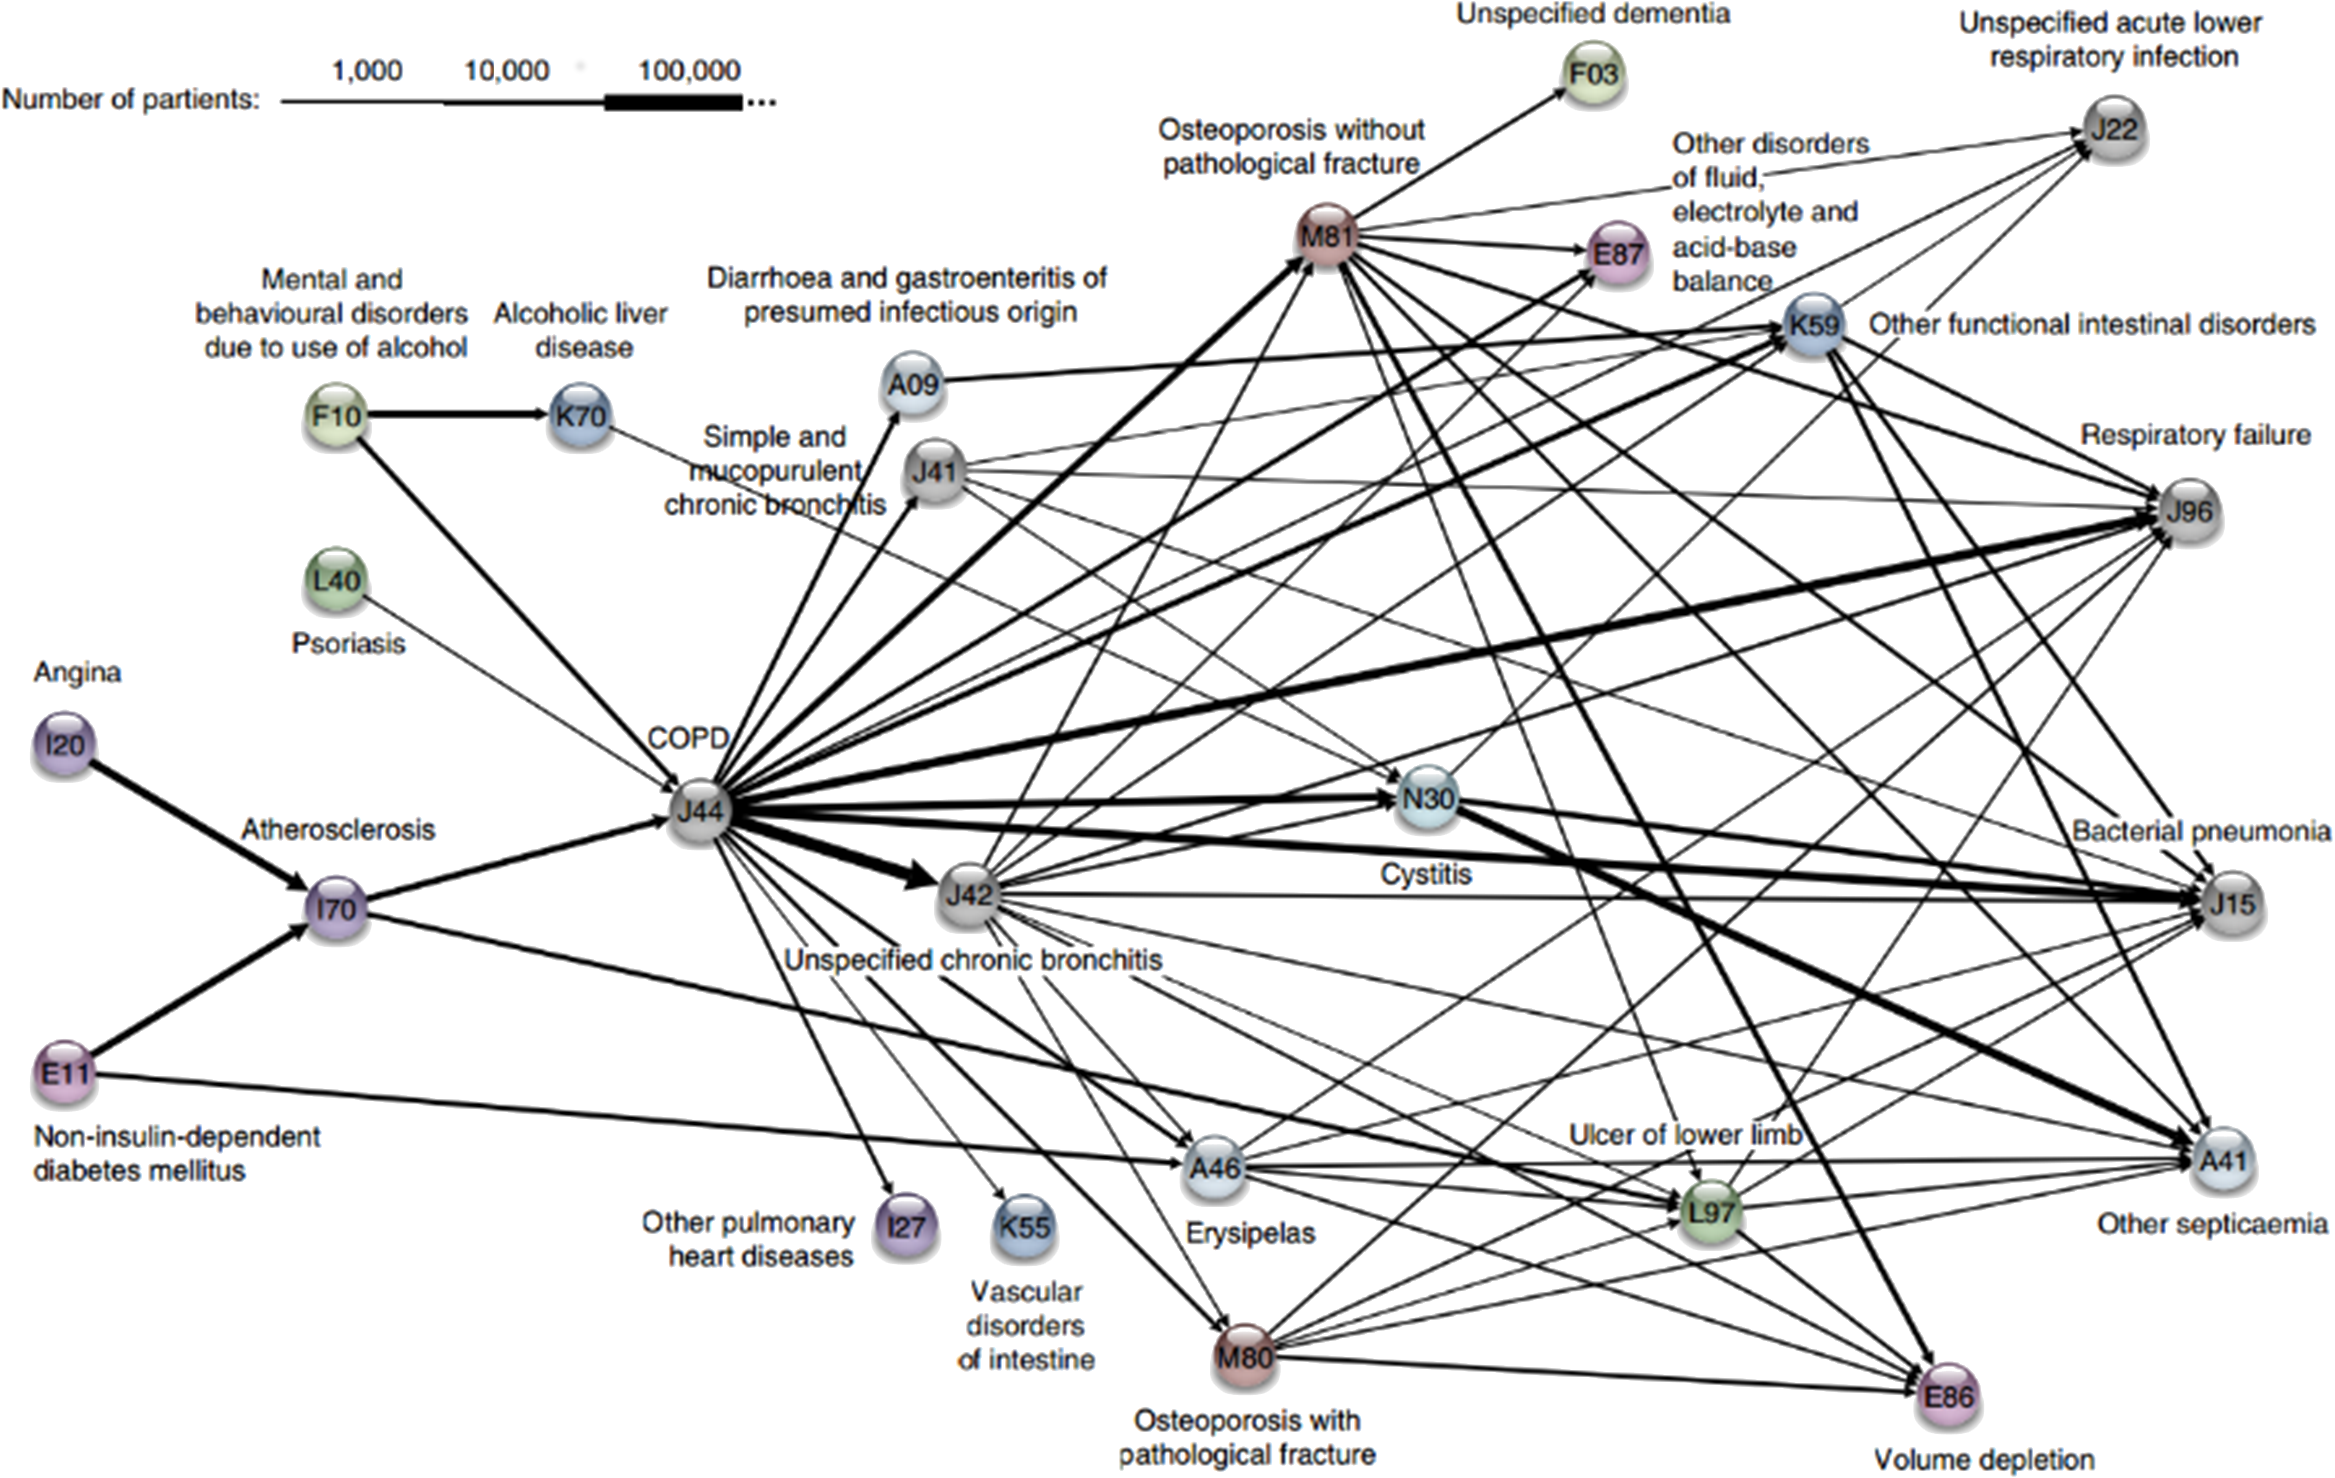 Diagnosis network around COPD in the Danish Medical Dataset.